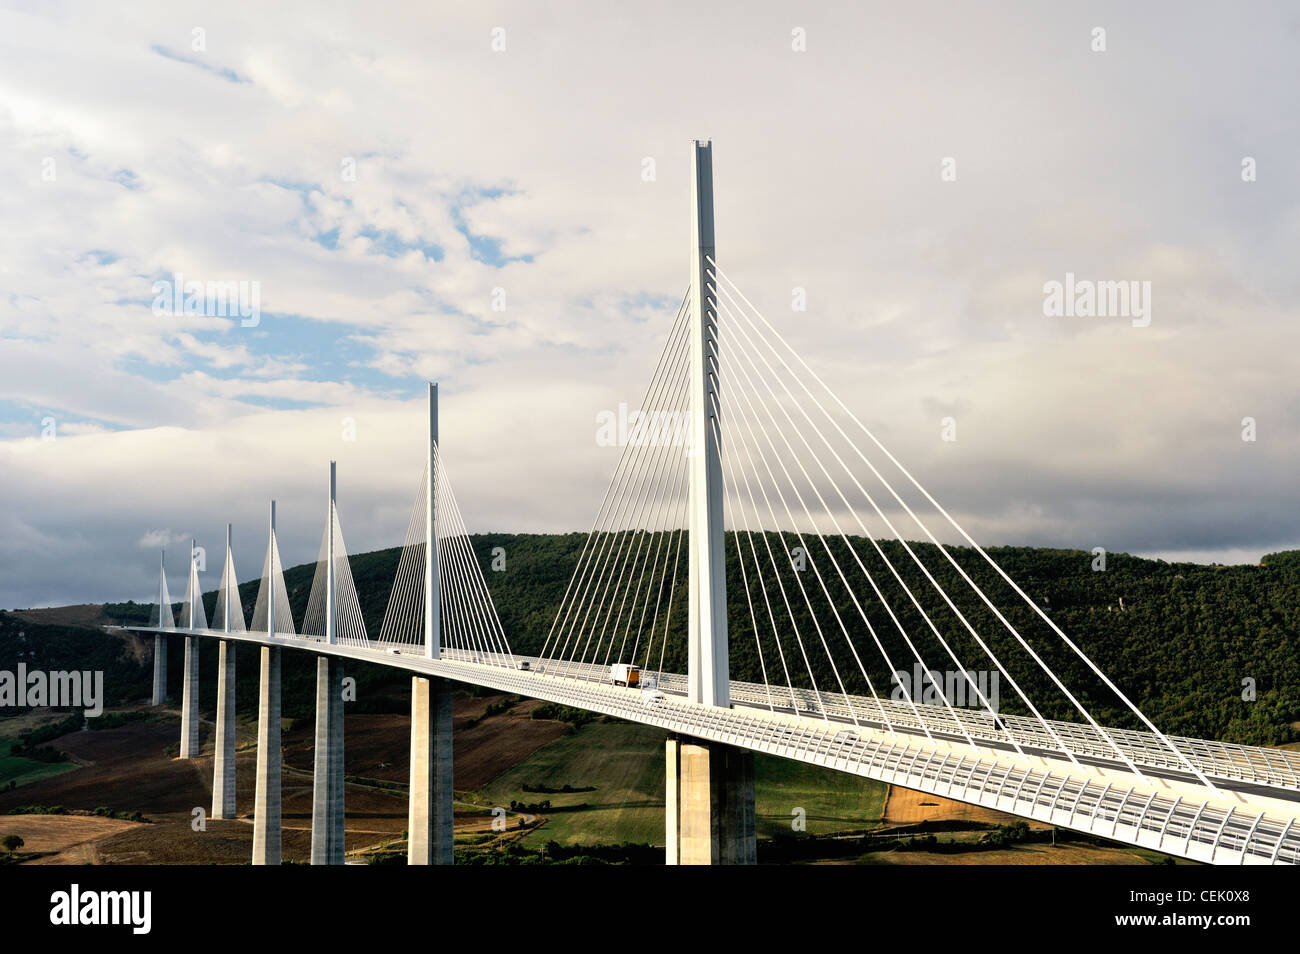 The Millau Viaduct, Languedoc, France. Cable-stayed road bridge carries A75 autoroute over the valley of the River Tarn Stock Photo